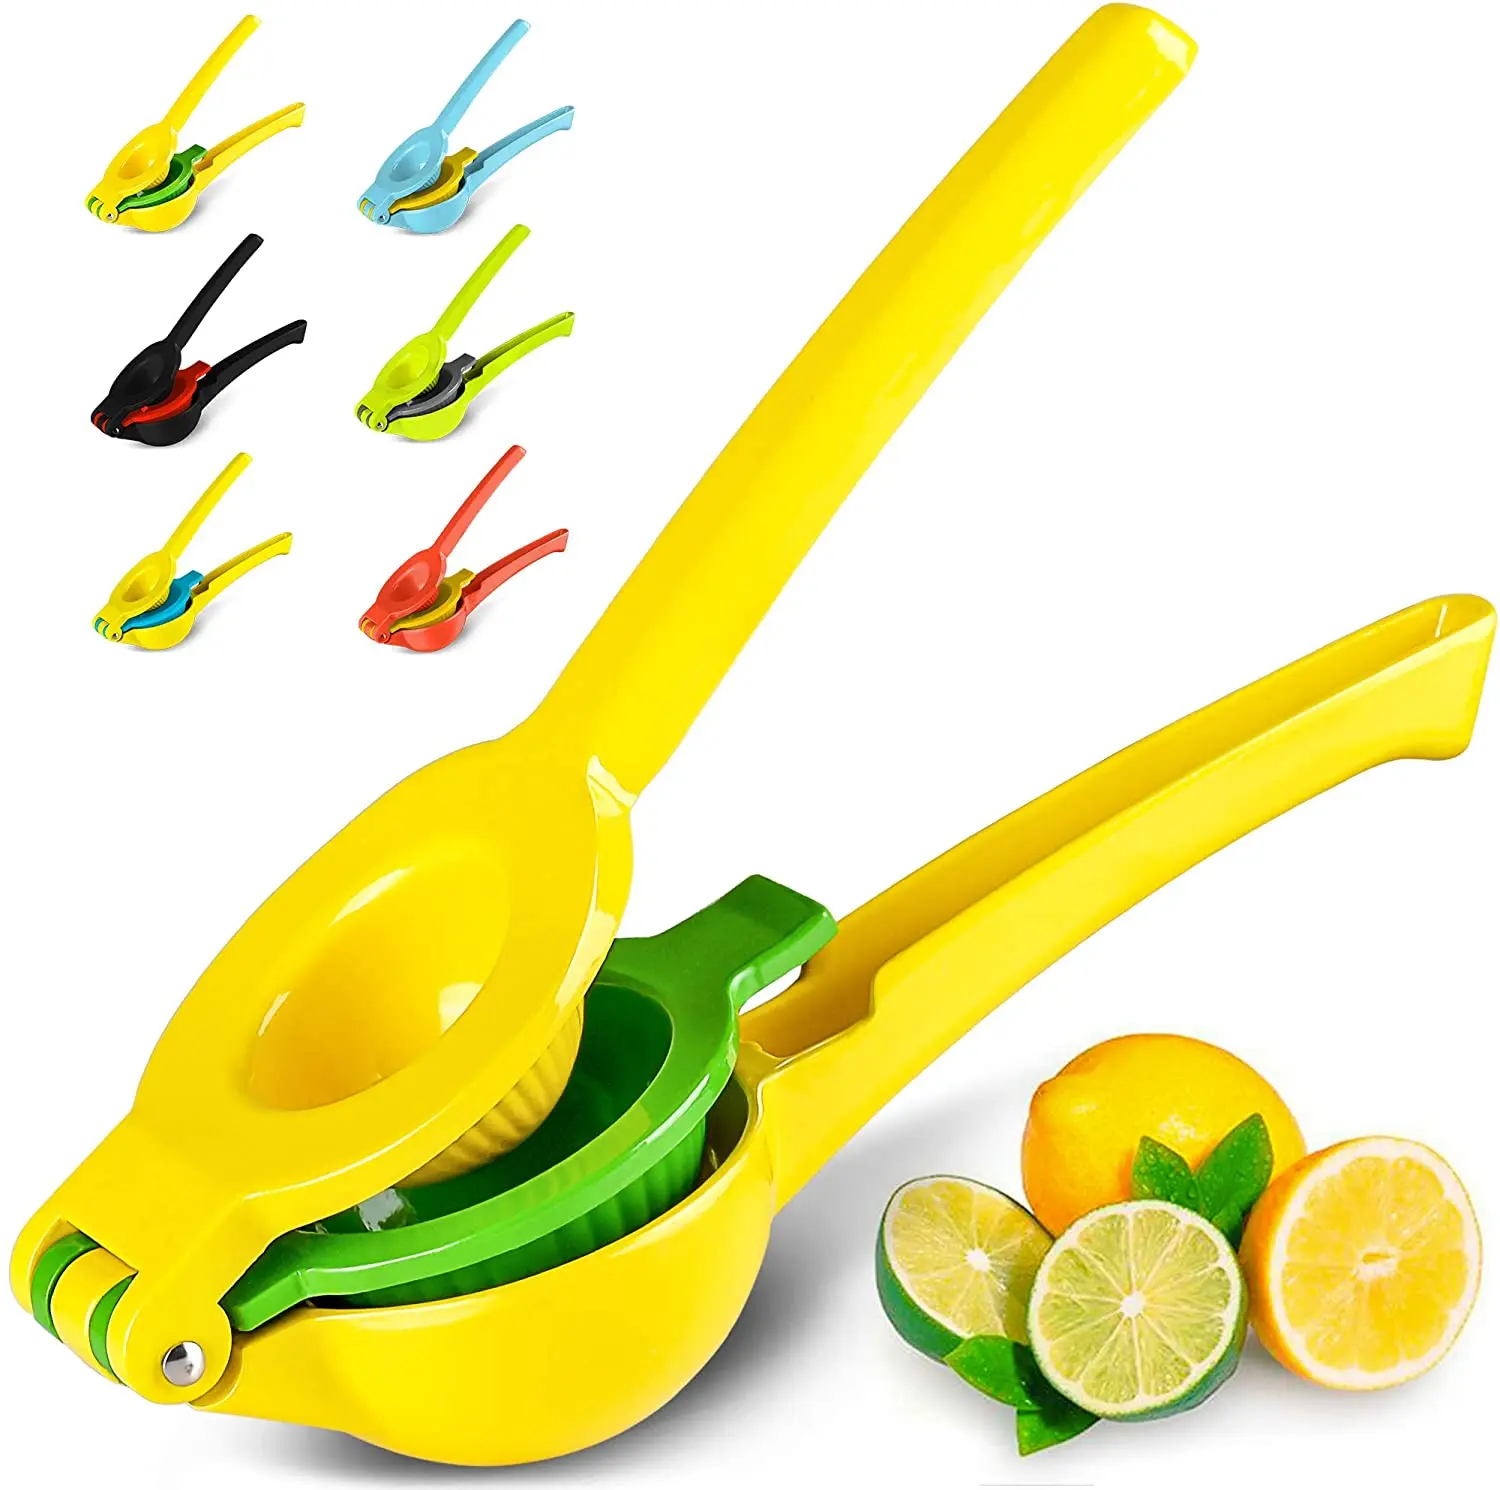 

Kitchen Tools Aluminum Alloy 2 In 1 Citrus Fruits Hand Manual lime Juicer Stainless Steel Lemon Squeezer